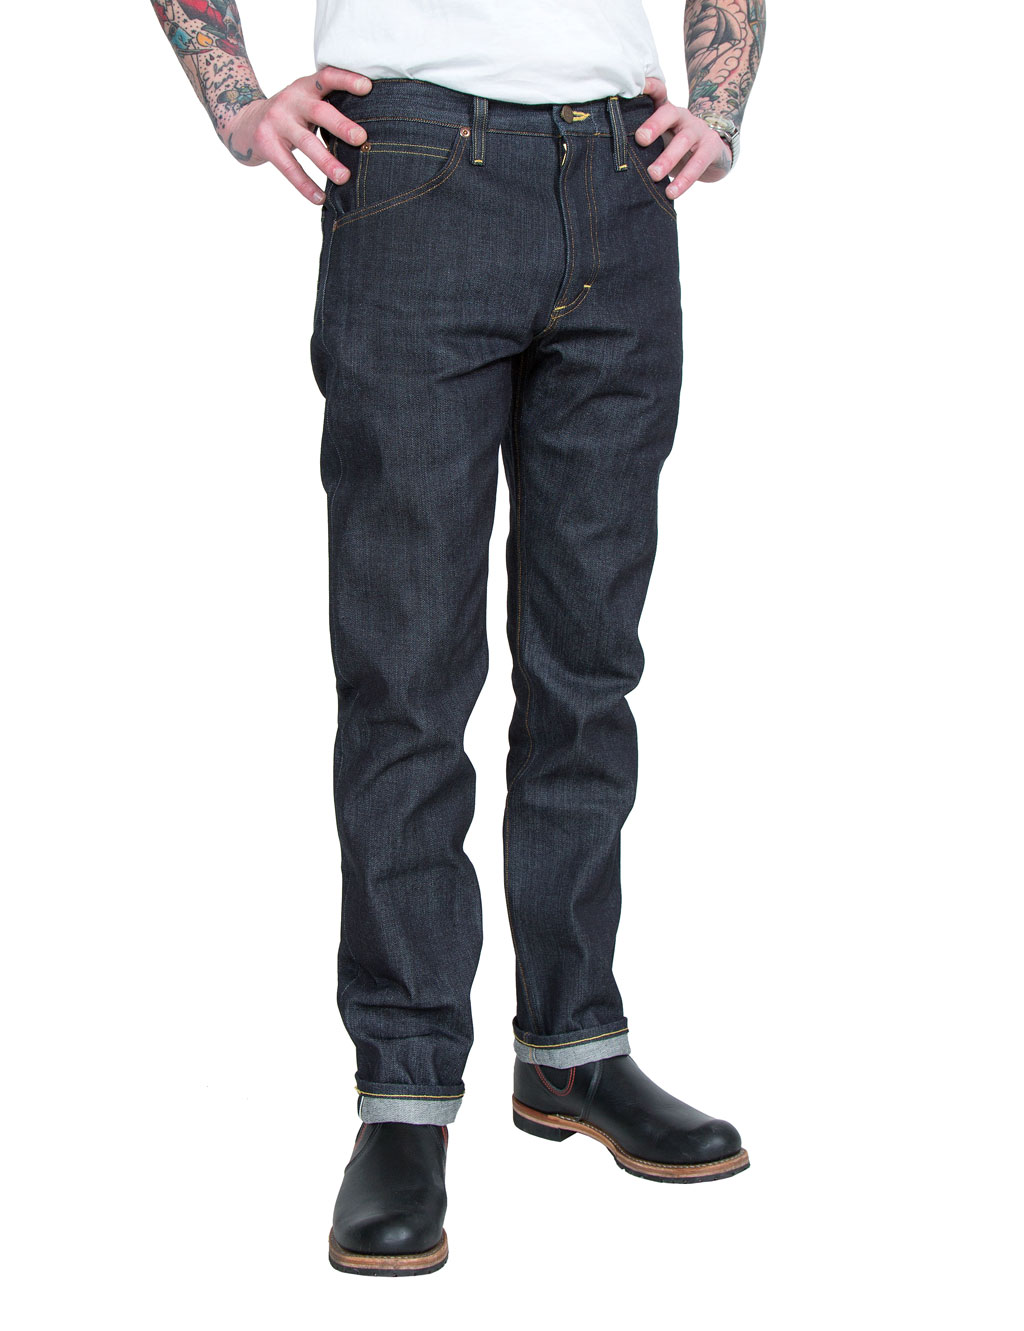 Lee - 101 Z Jeans NS Recycled Selvage Denim - 13.75 oz